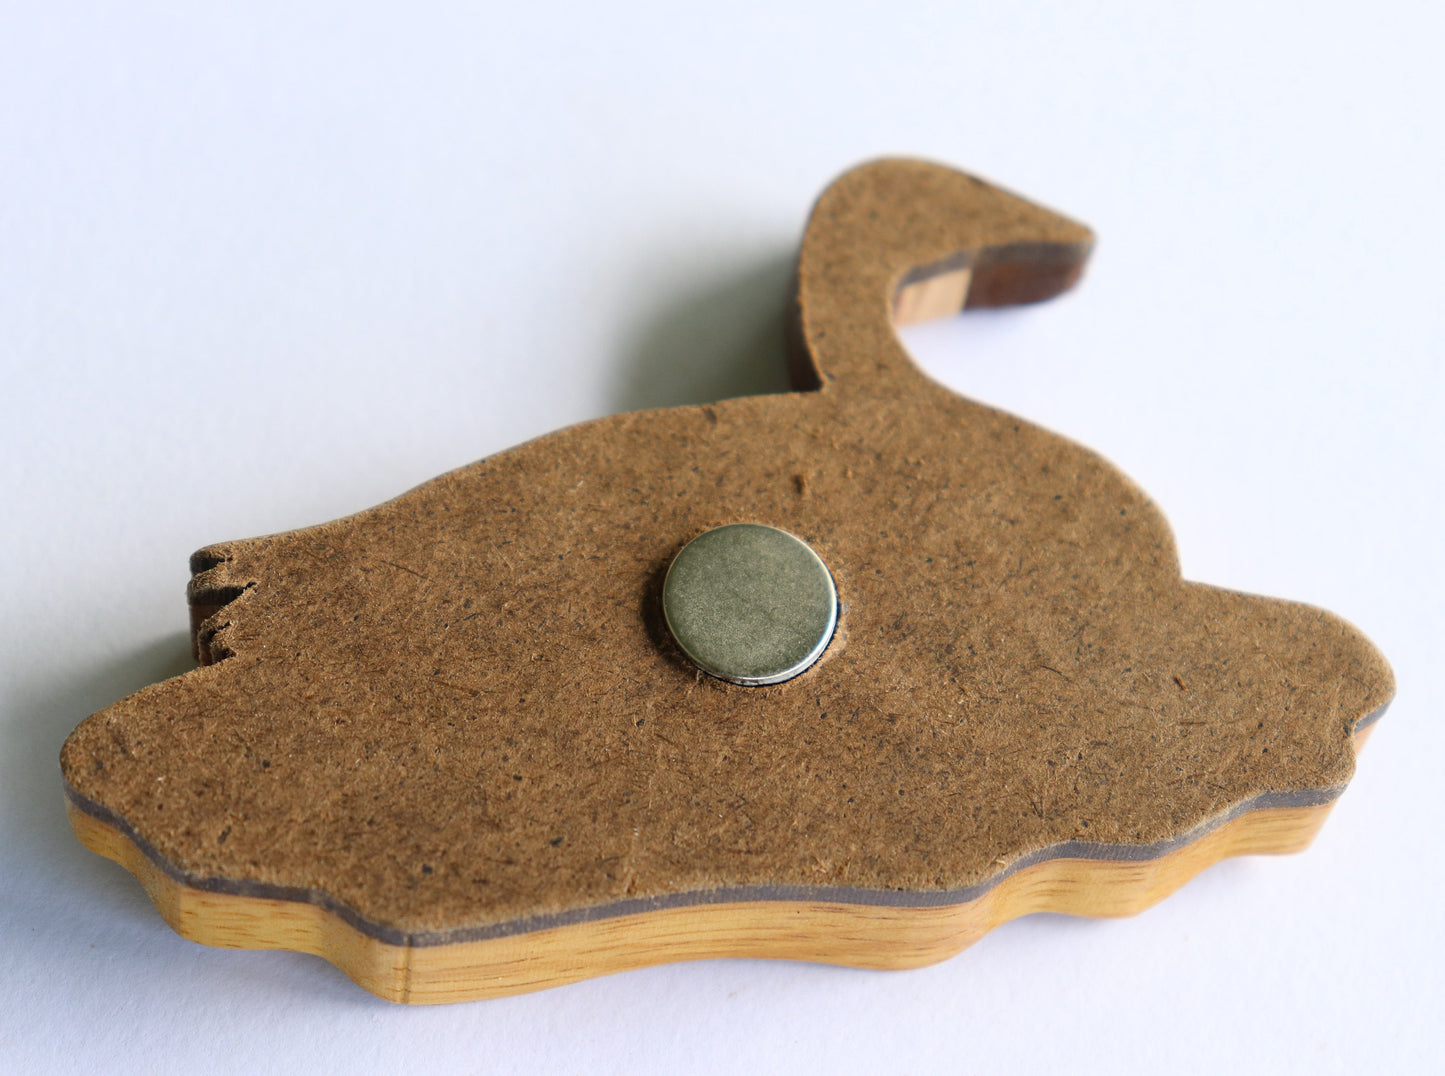 Canadian Goose Magnet / Ornament - 6th Day of Christmas